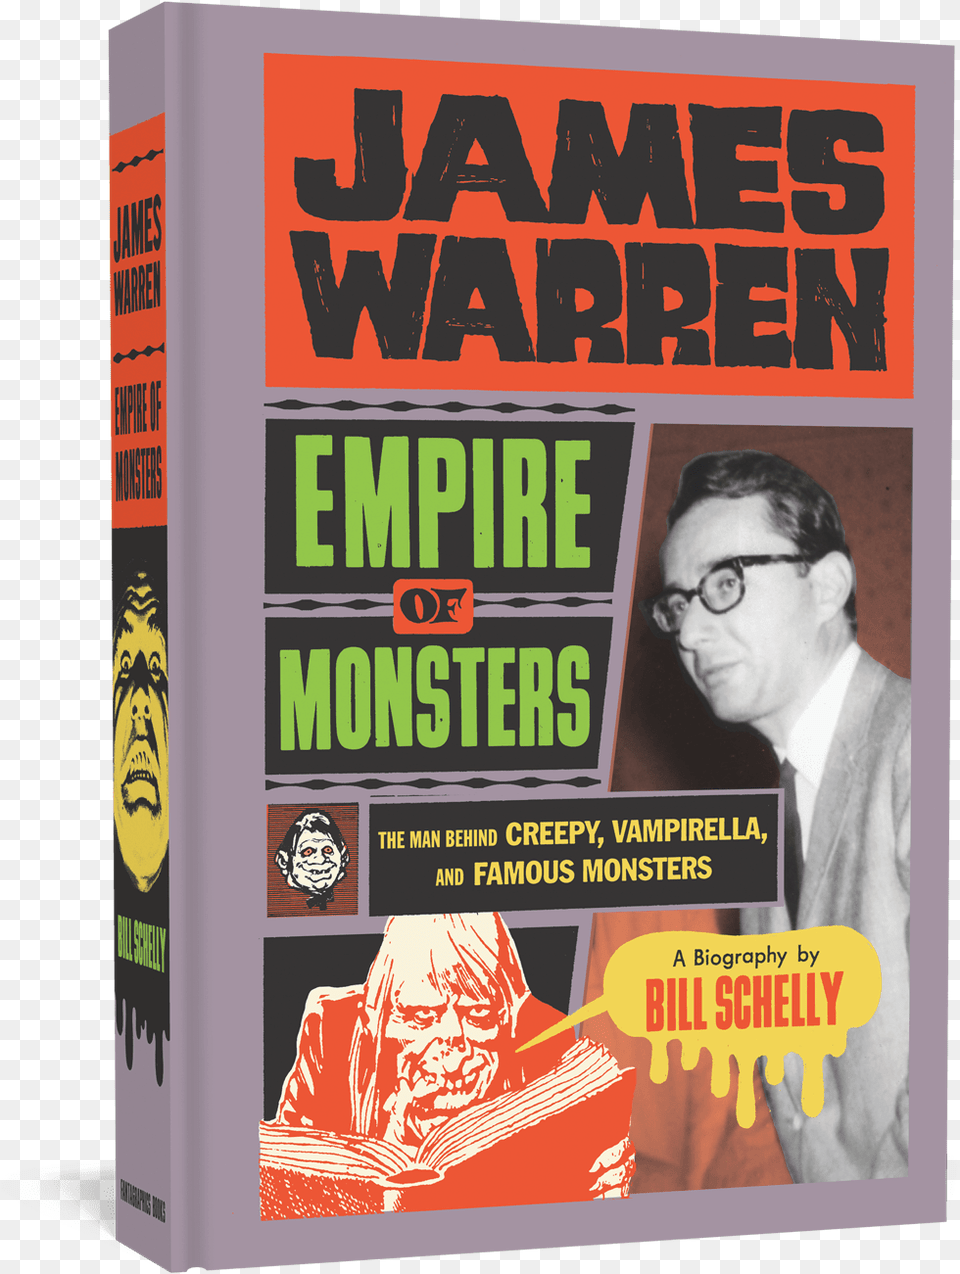 Empire Of Monsters James Warren Empire Of Monsters, Advertisement, Publication, Poster, Man Png